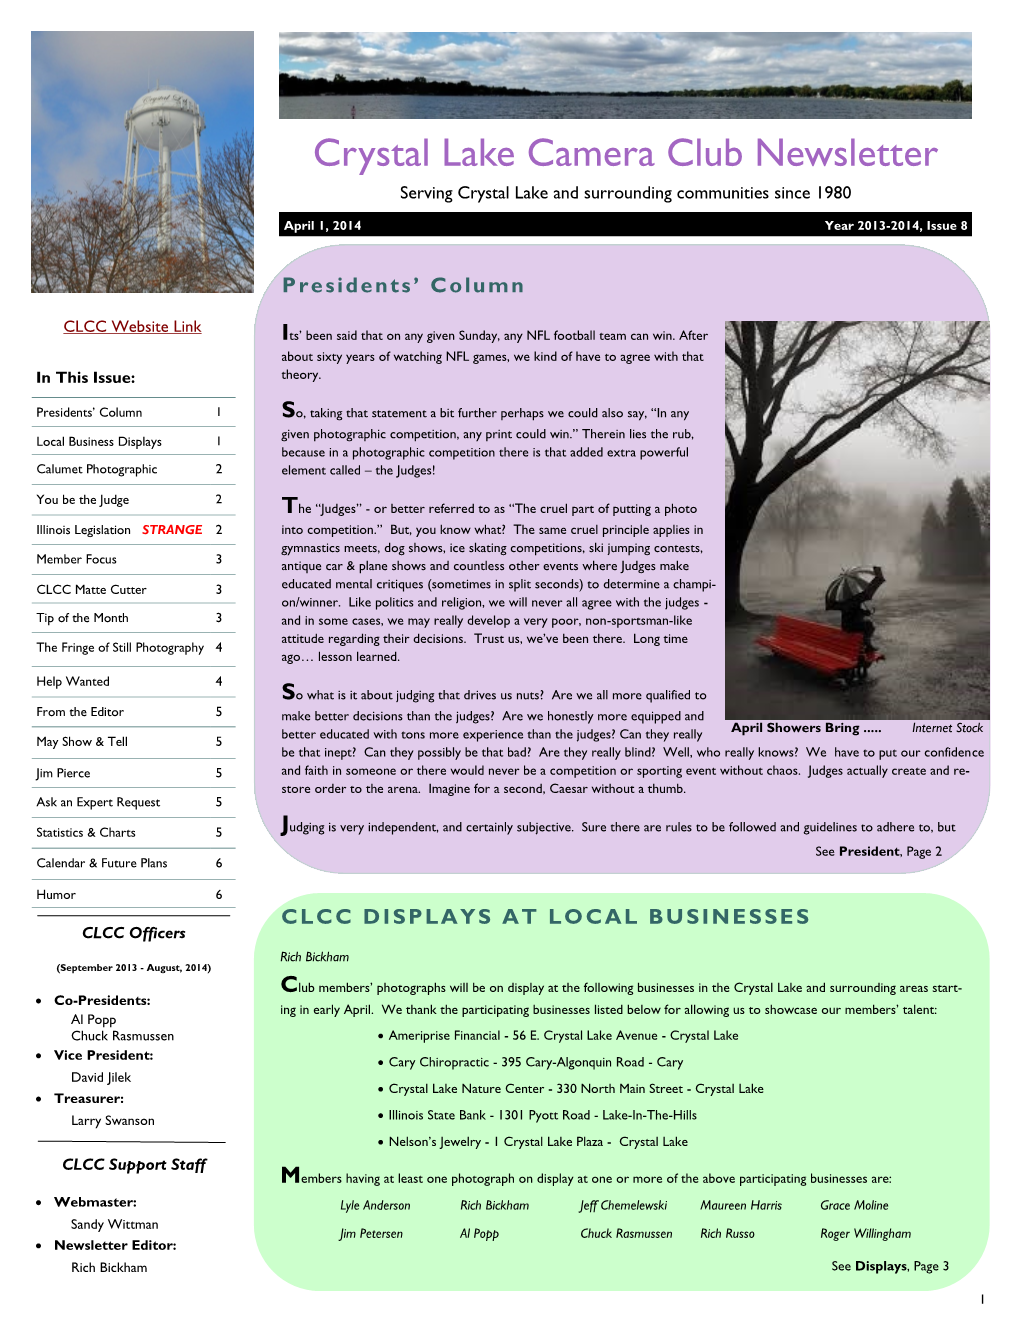 Crystal Lake Camera Club Newsletter Serving Crystal Lake and Surrounding Communities Since 1980